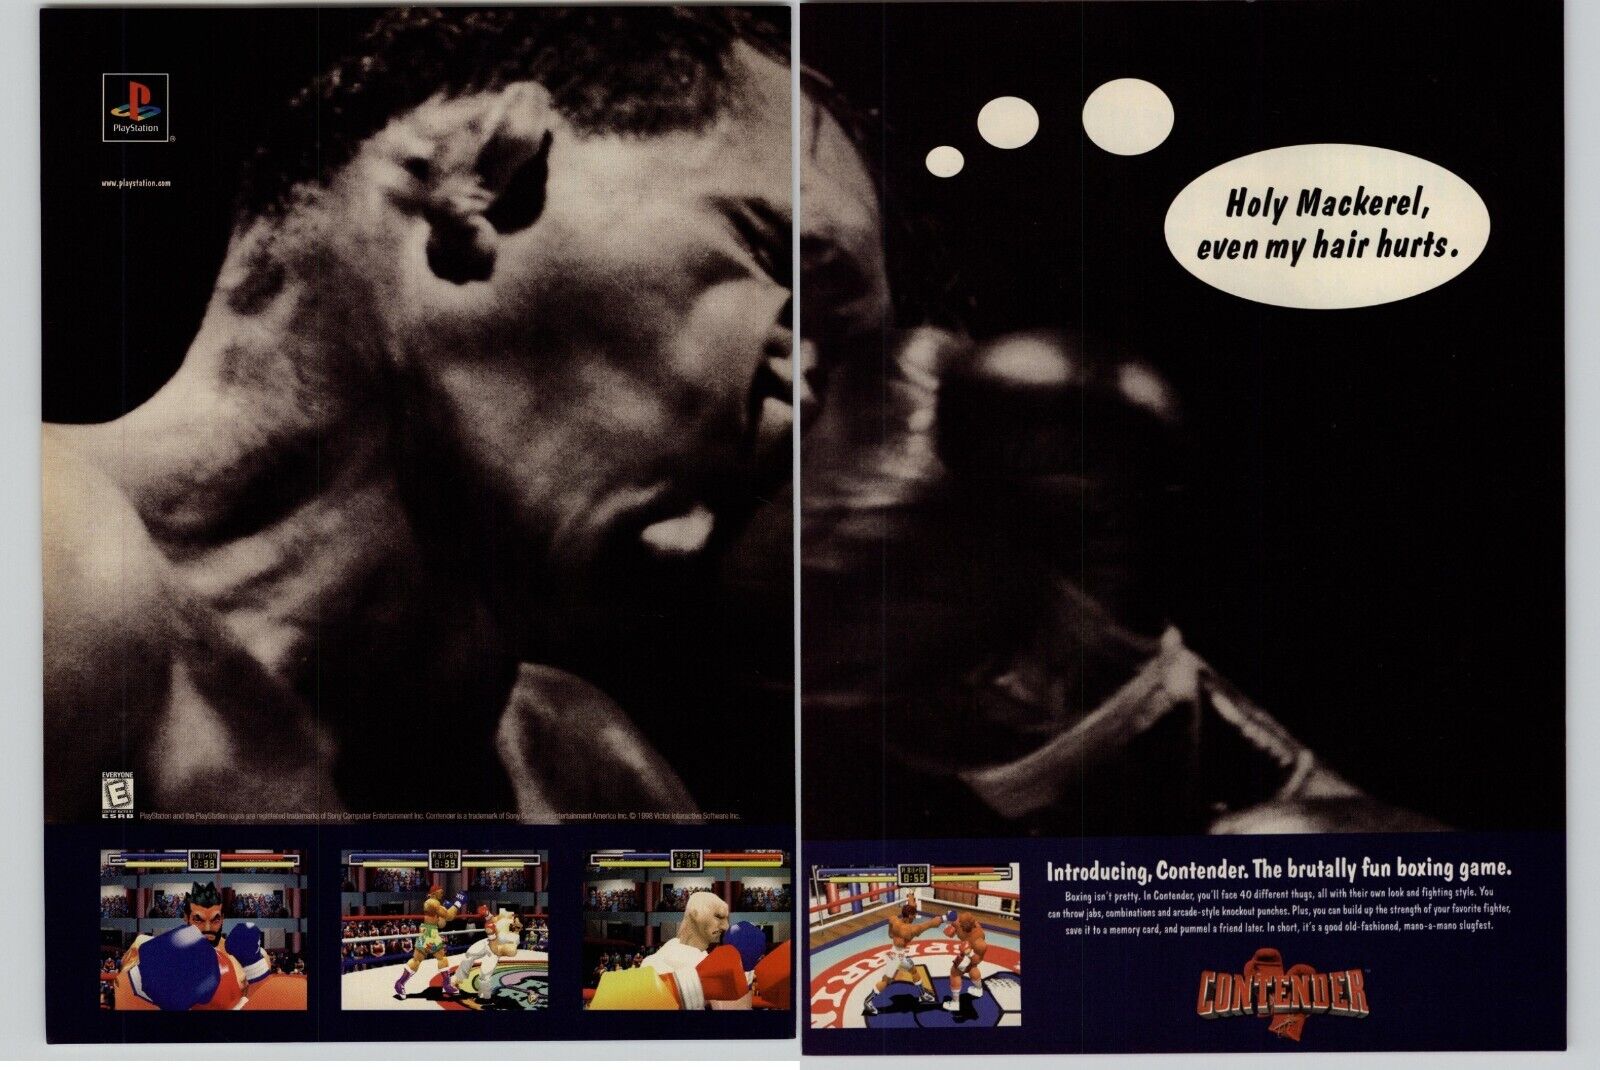 Contender PS1 Playstation 1 Boxing Video Game Art 1998 Vintage Poster Ad Print 